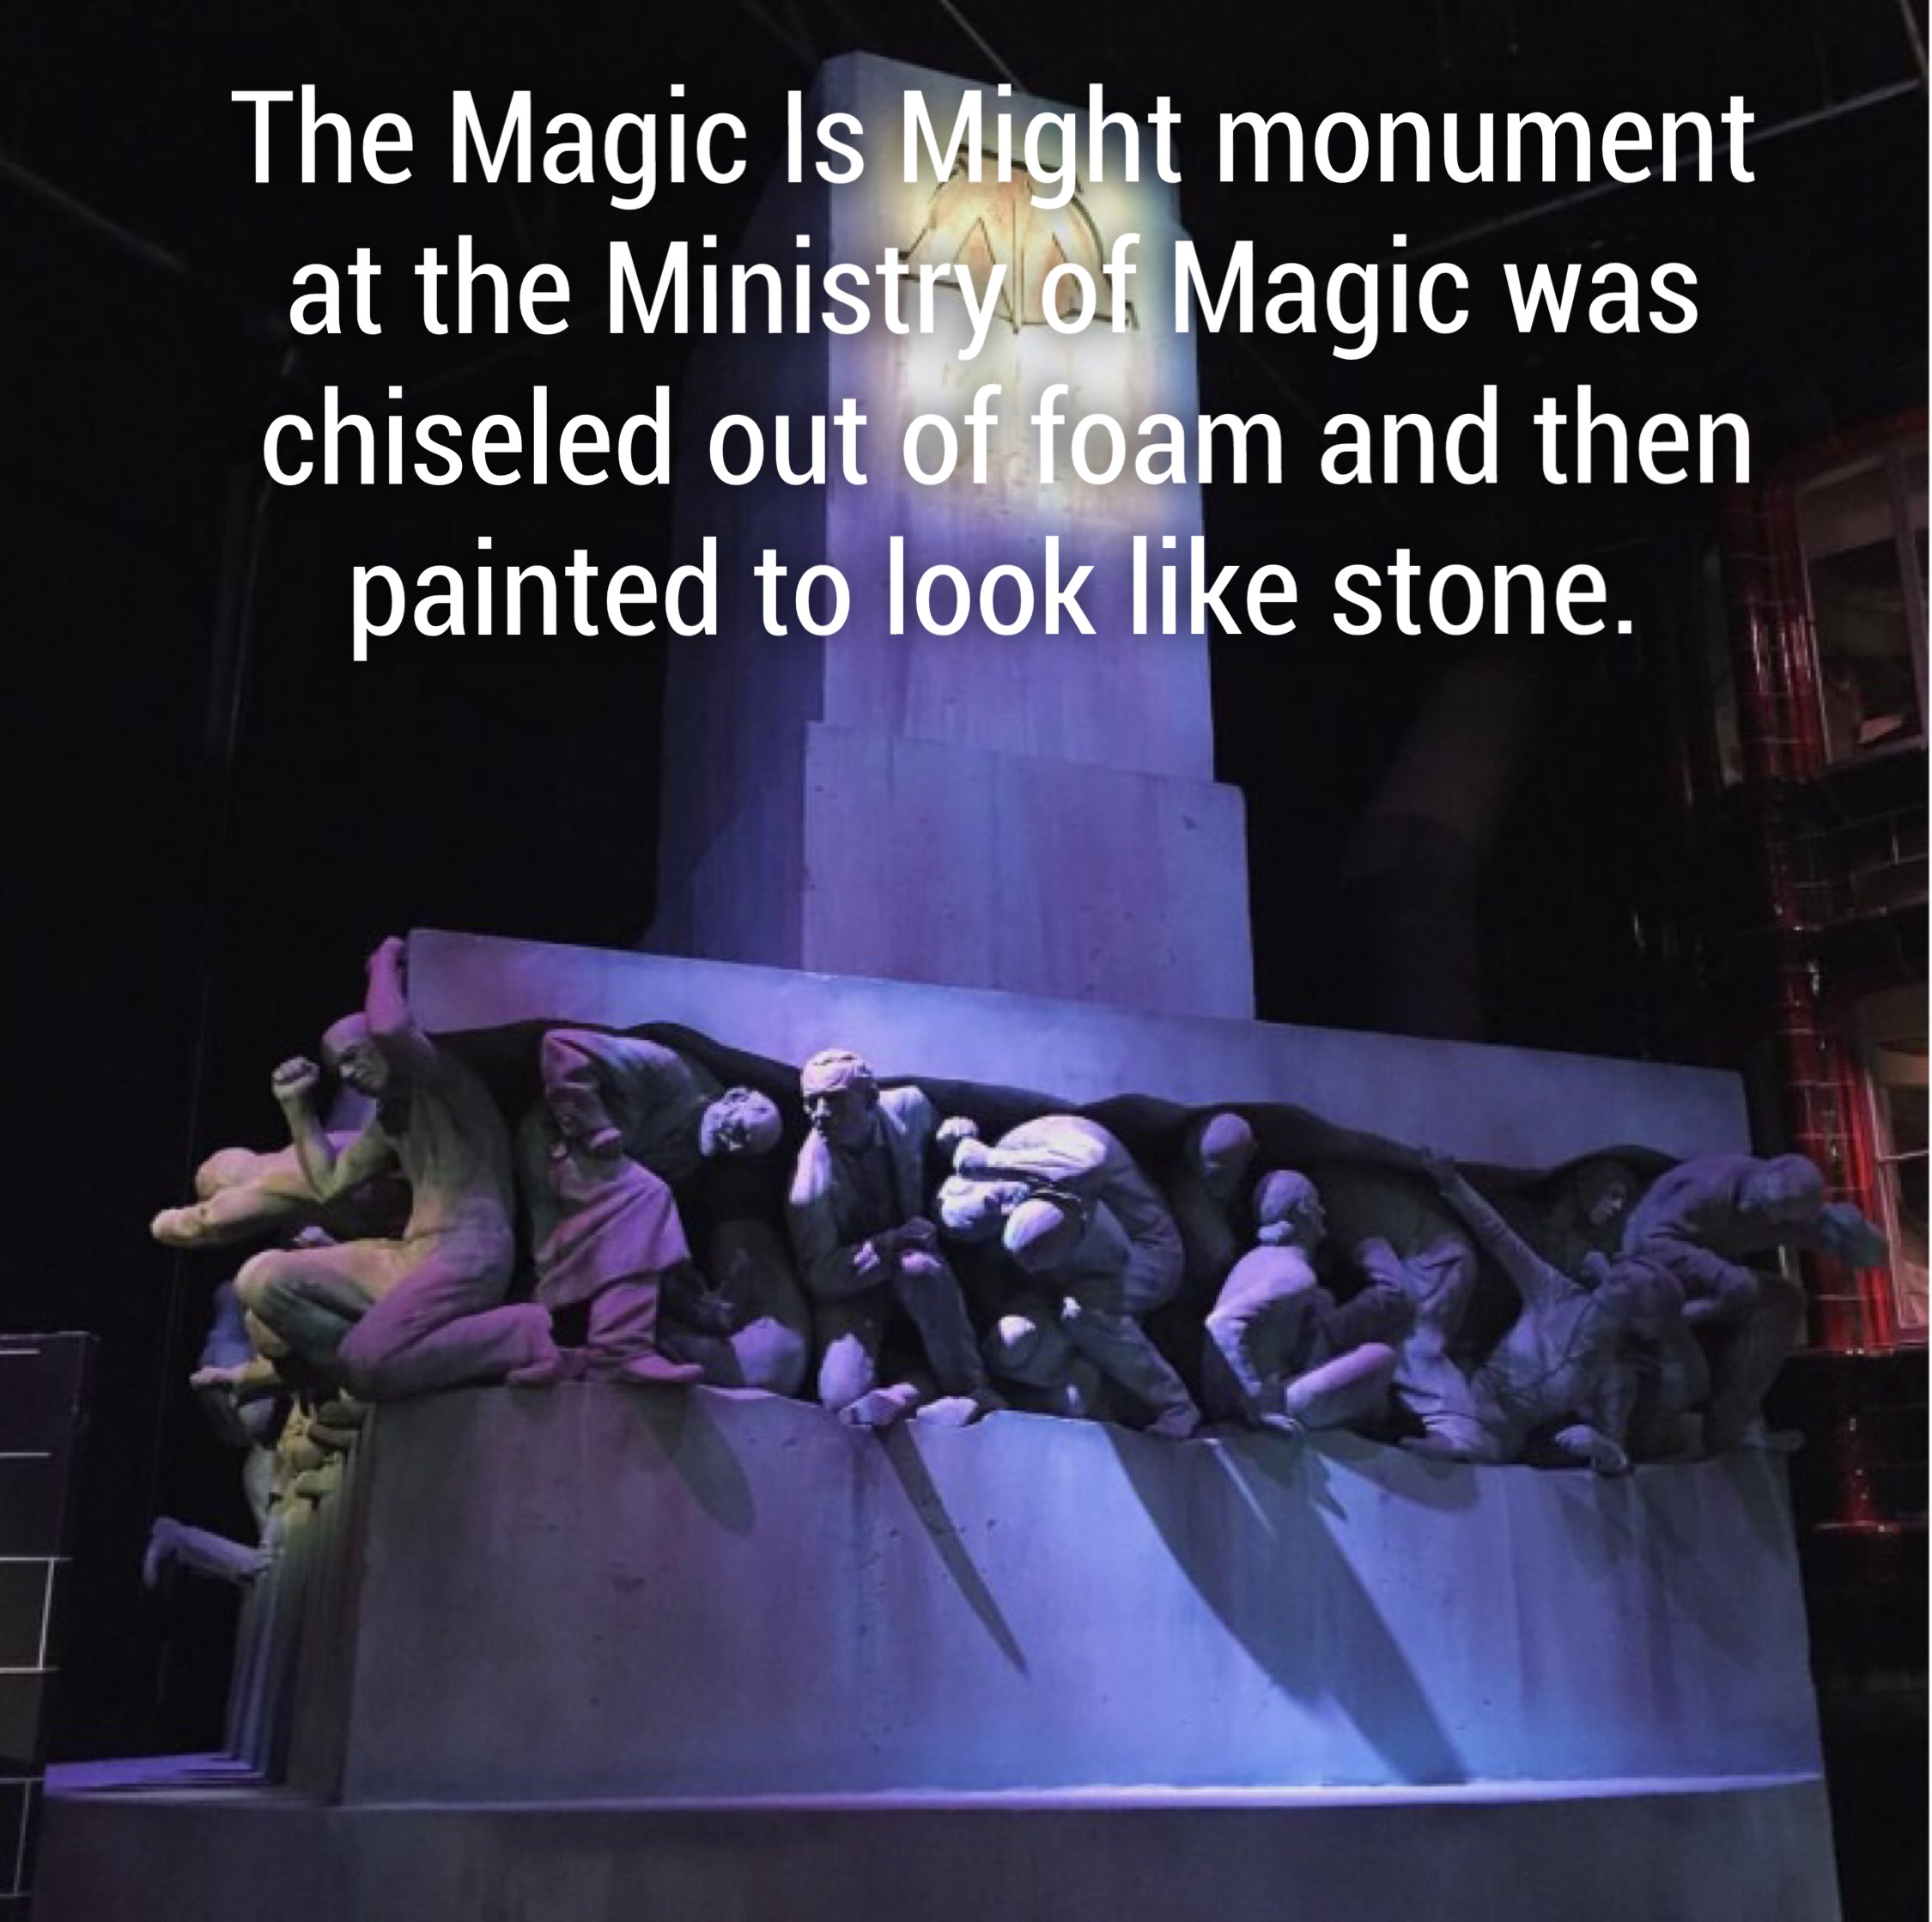 stage - The Magic Is Might monument at the Ministry of Magic was chiseled out of foam and then painted to look stone.